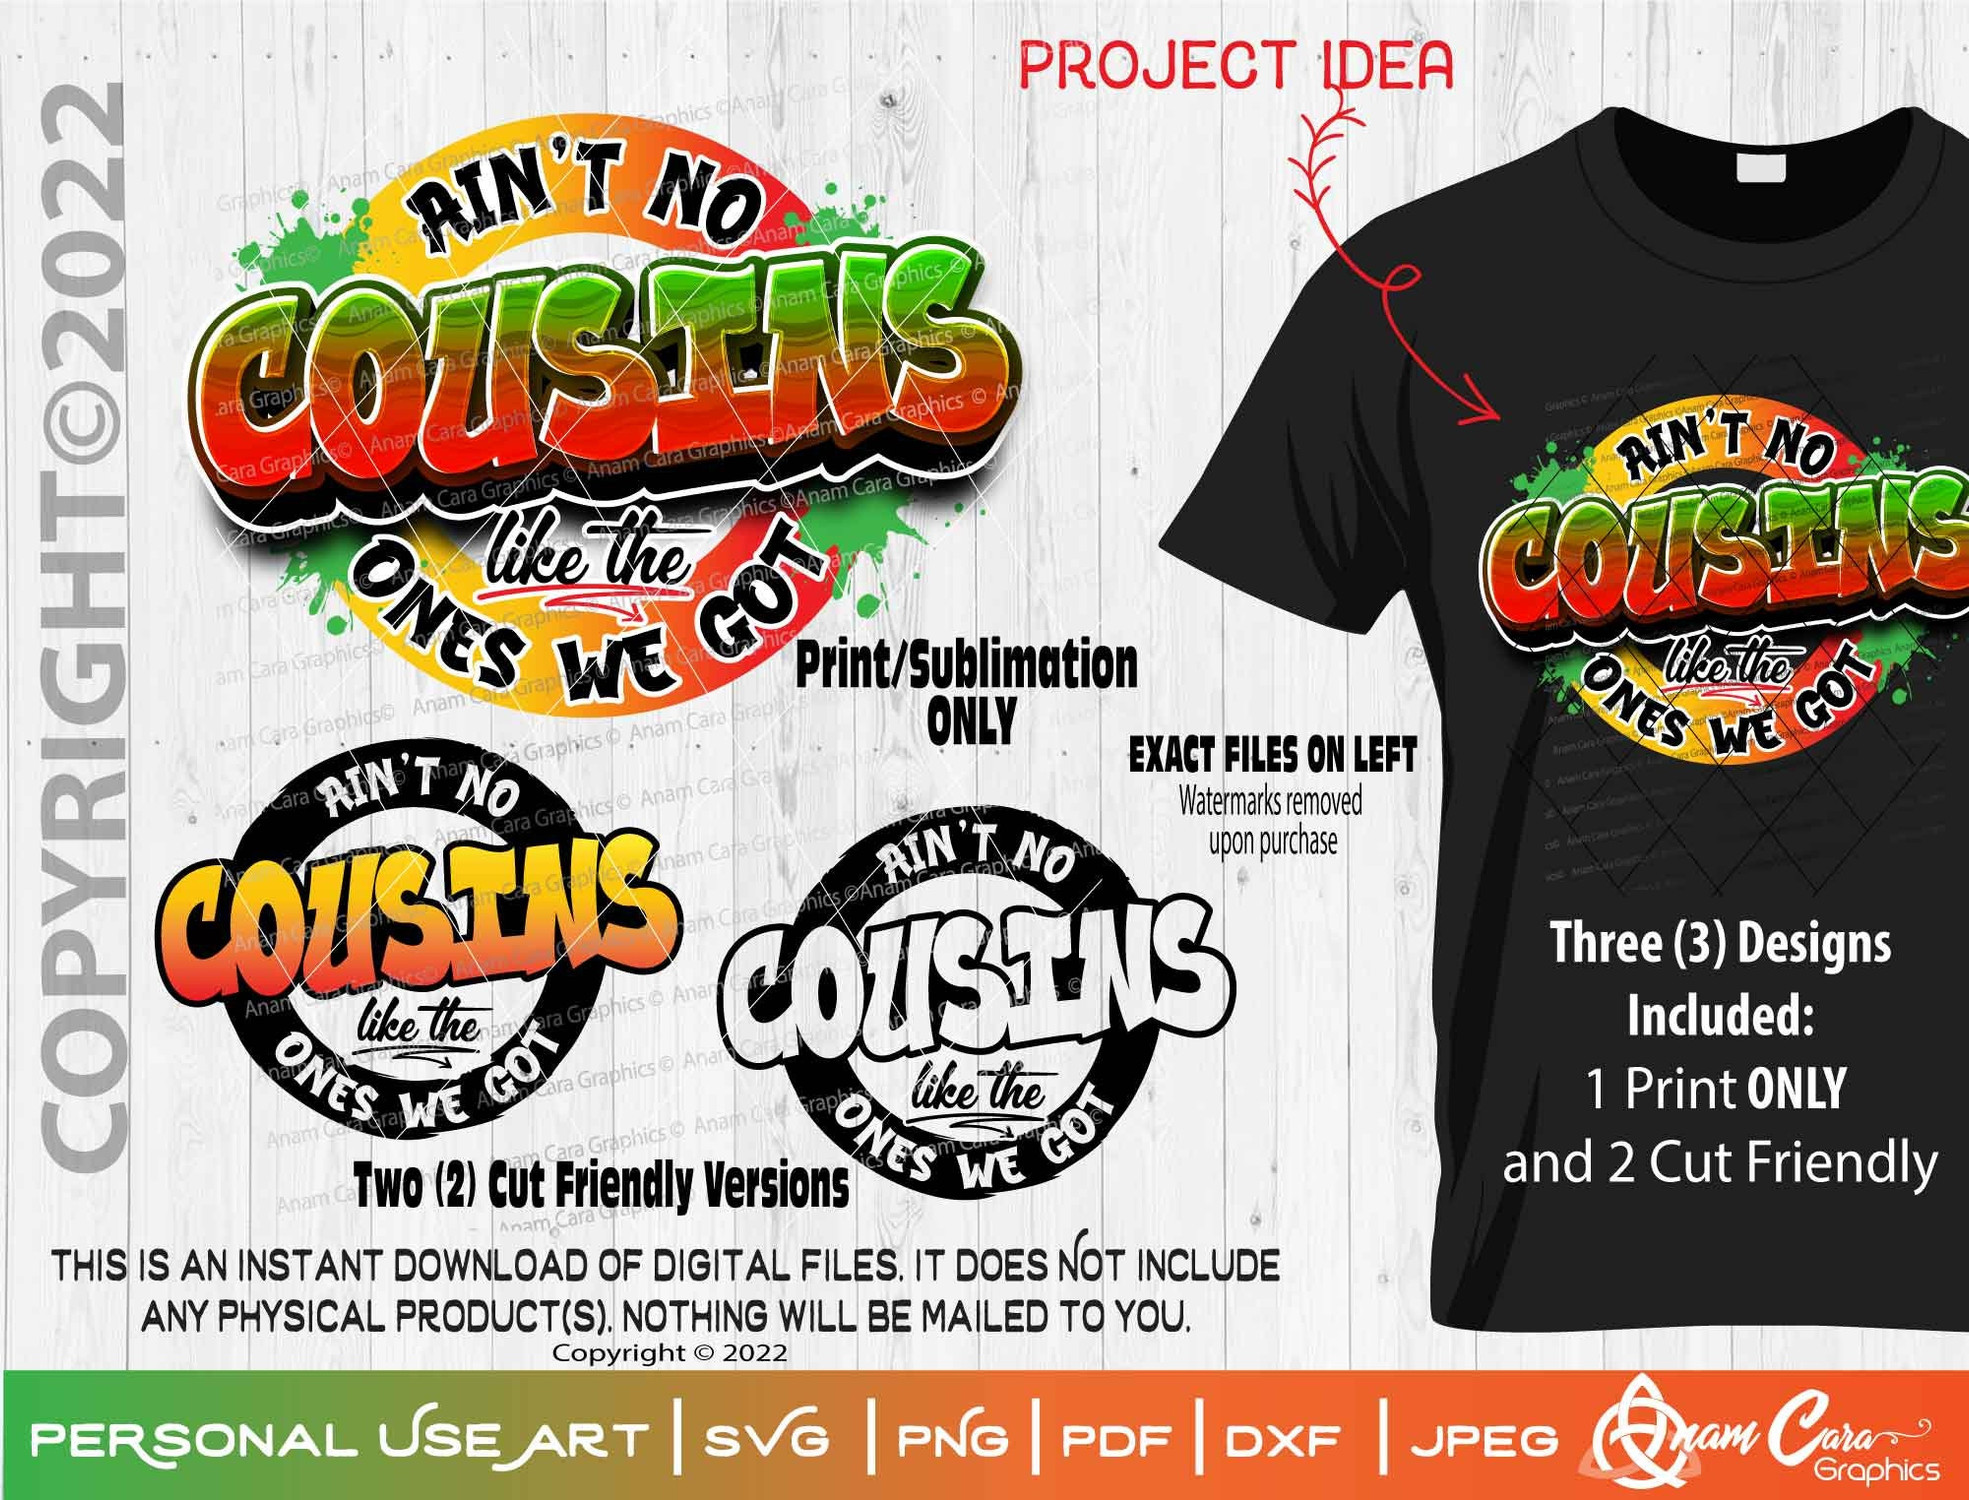 Ain't No Cousins Like the Ones We Got Circle - 3 Designs included